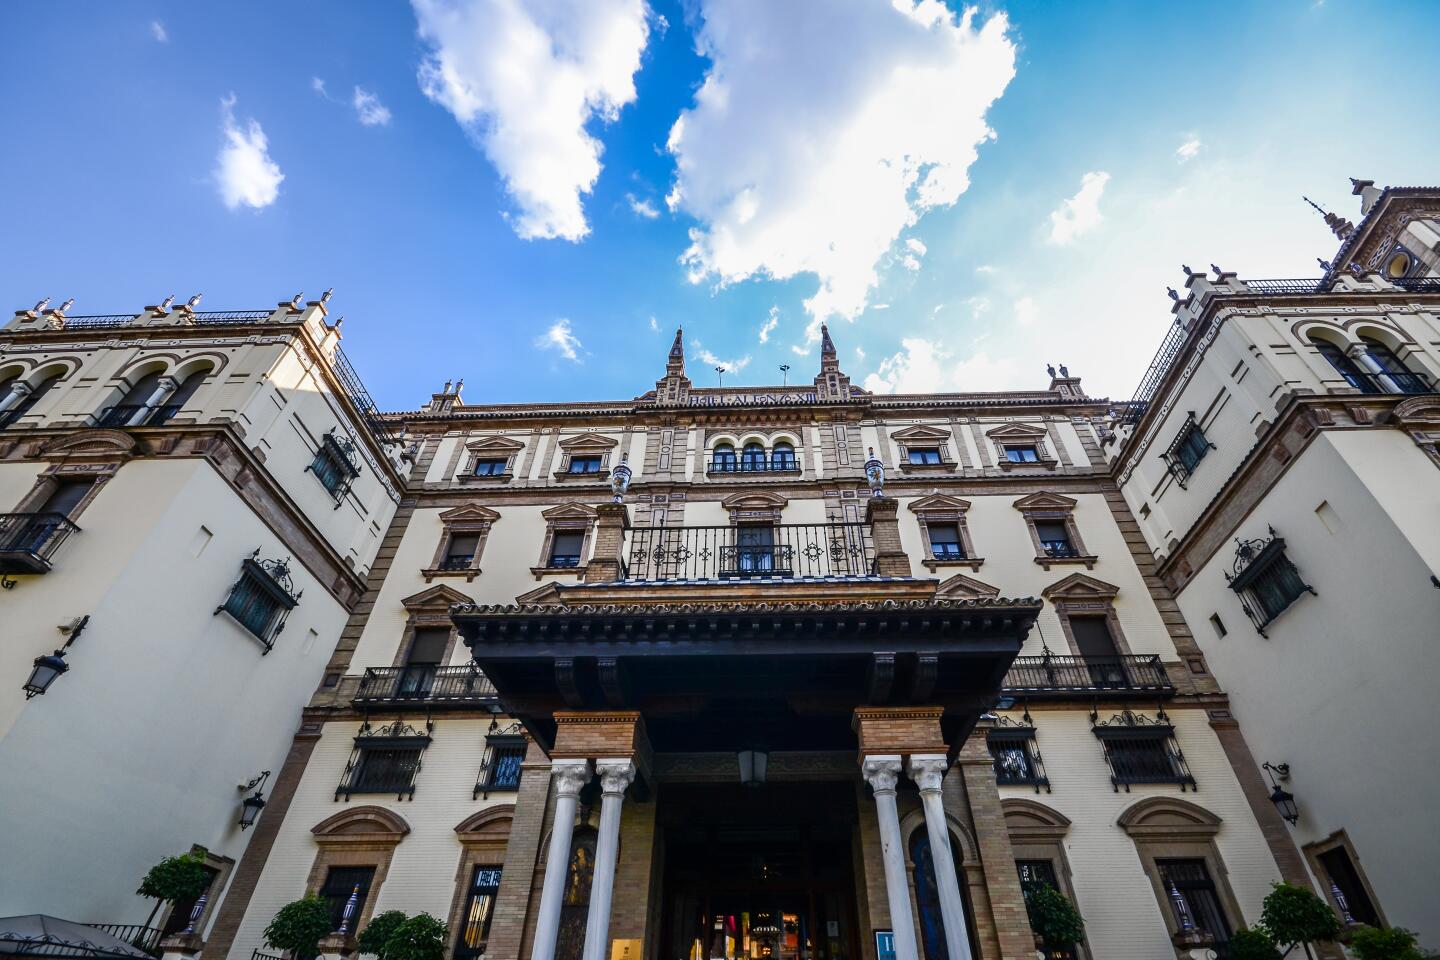 Facade of Alfonso XIII hotel in Seville, Spain